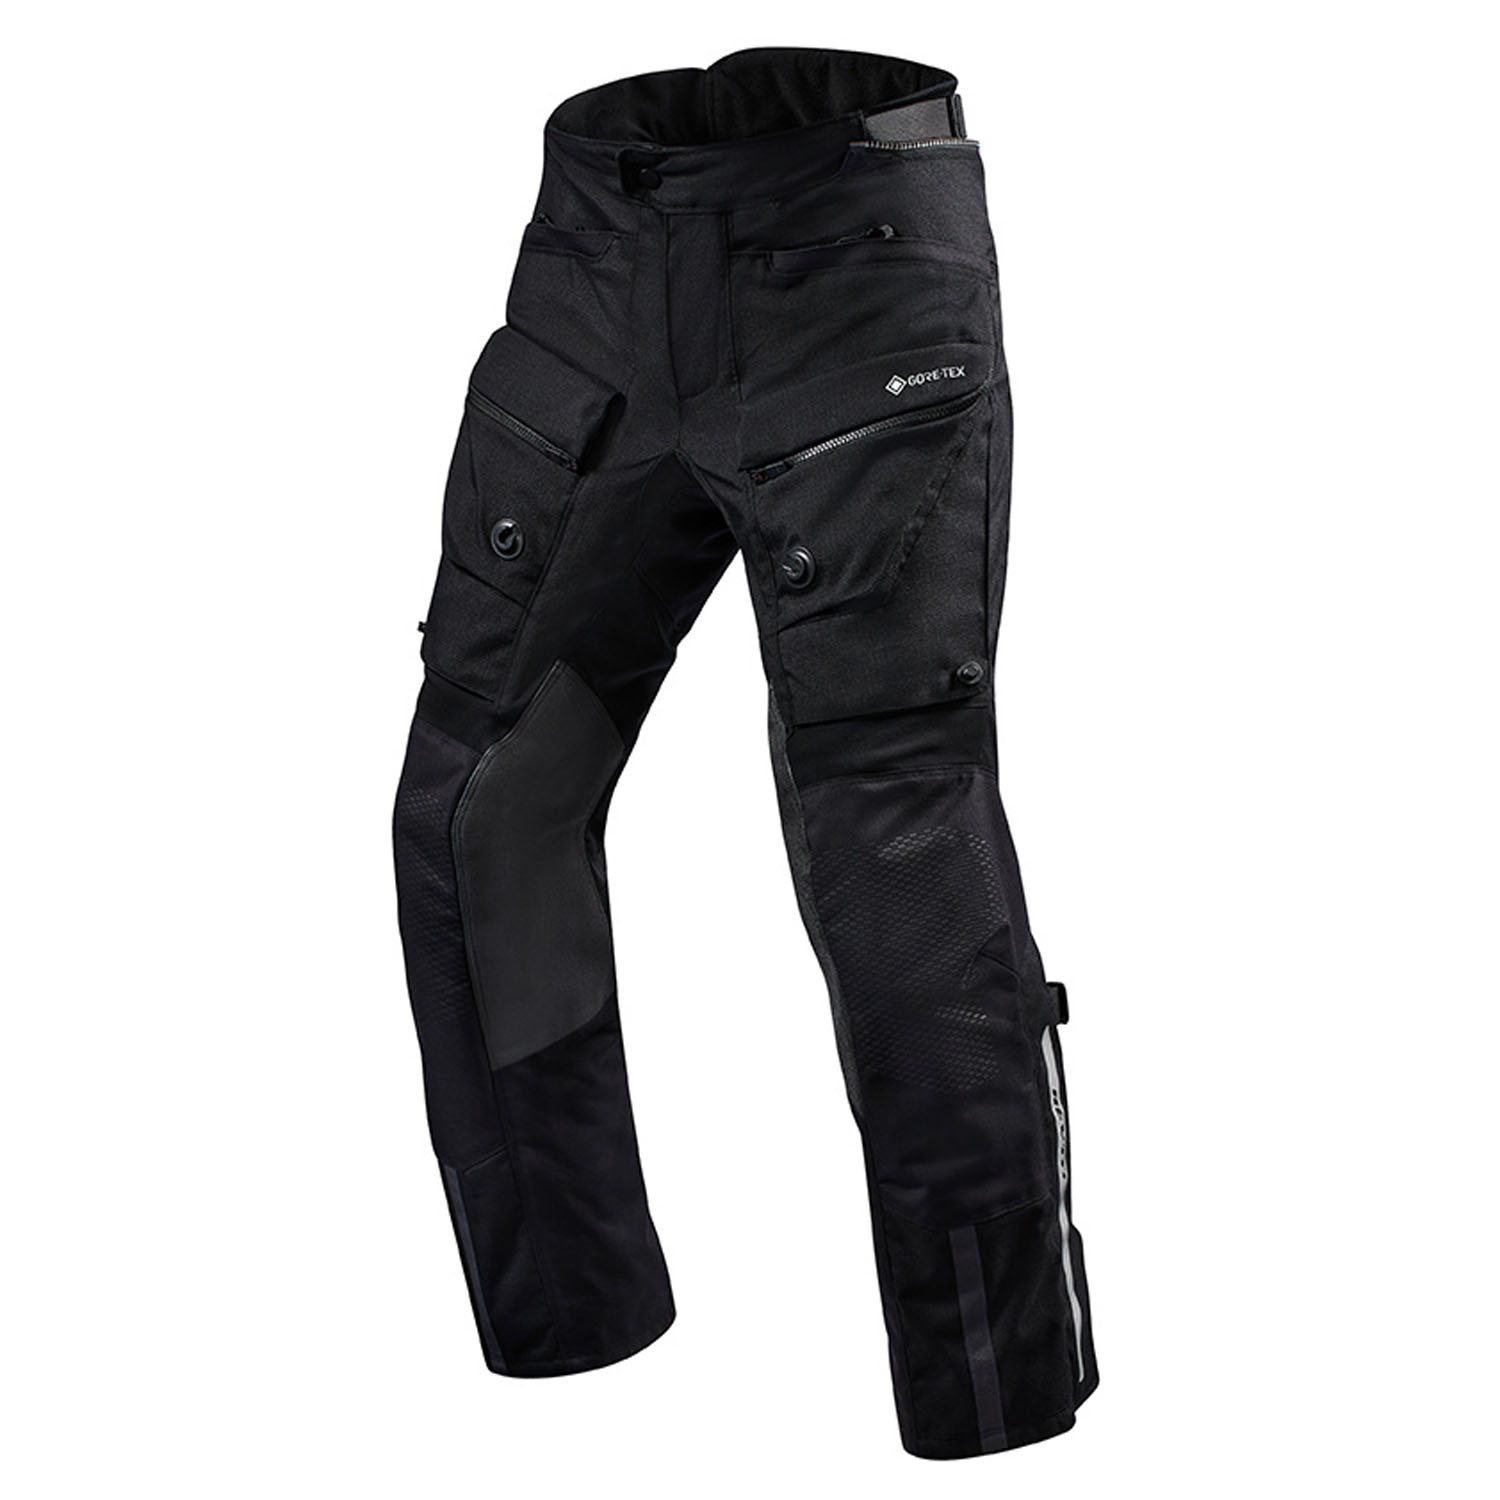 Image of EU REV'IT! Trousers Defender 3 GTX Black Long Motorcycle Pants Taille 2XL